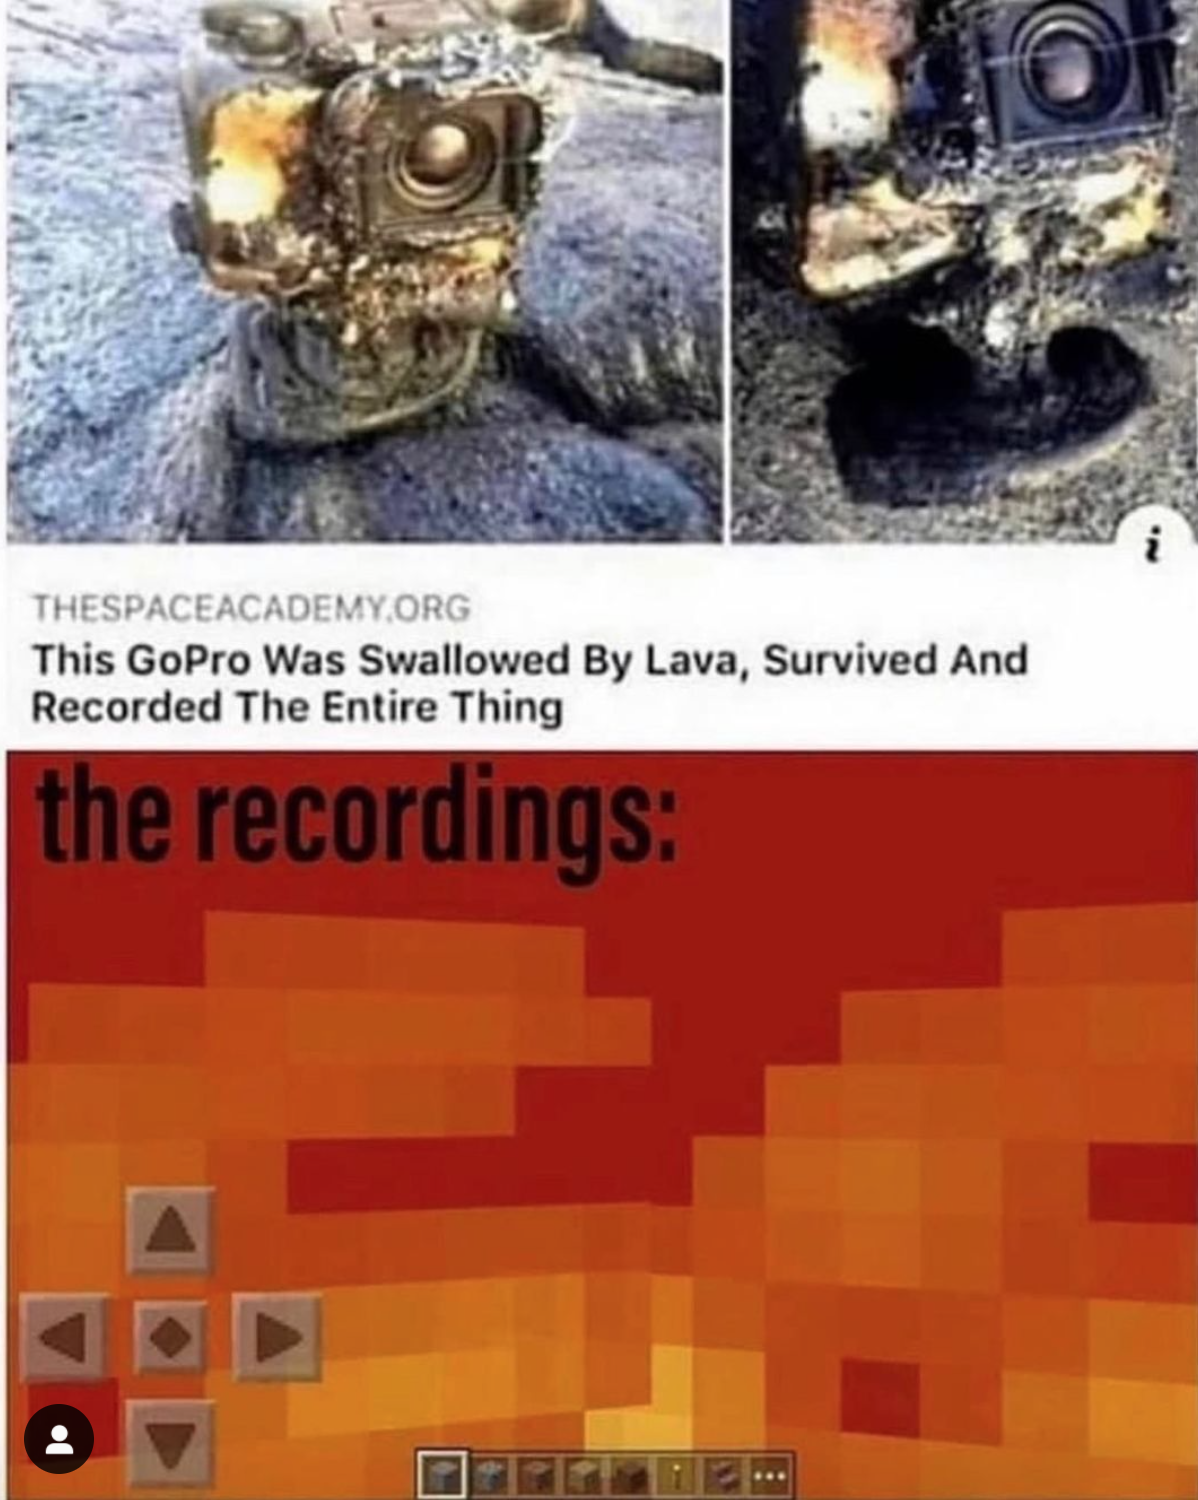 gaming memes - gopro survives lava meme - O Thespaceacademy.Org This GoPro Was Swallowed By Lava, Survived And Recorded The Entire Thing the recordings